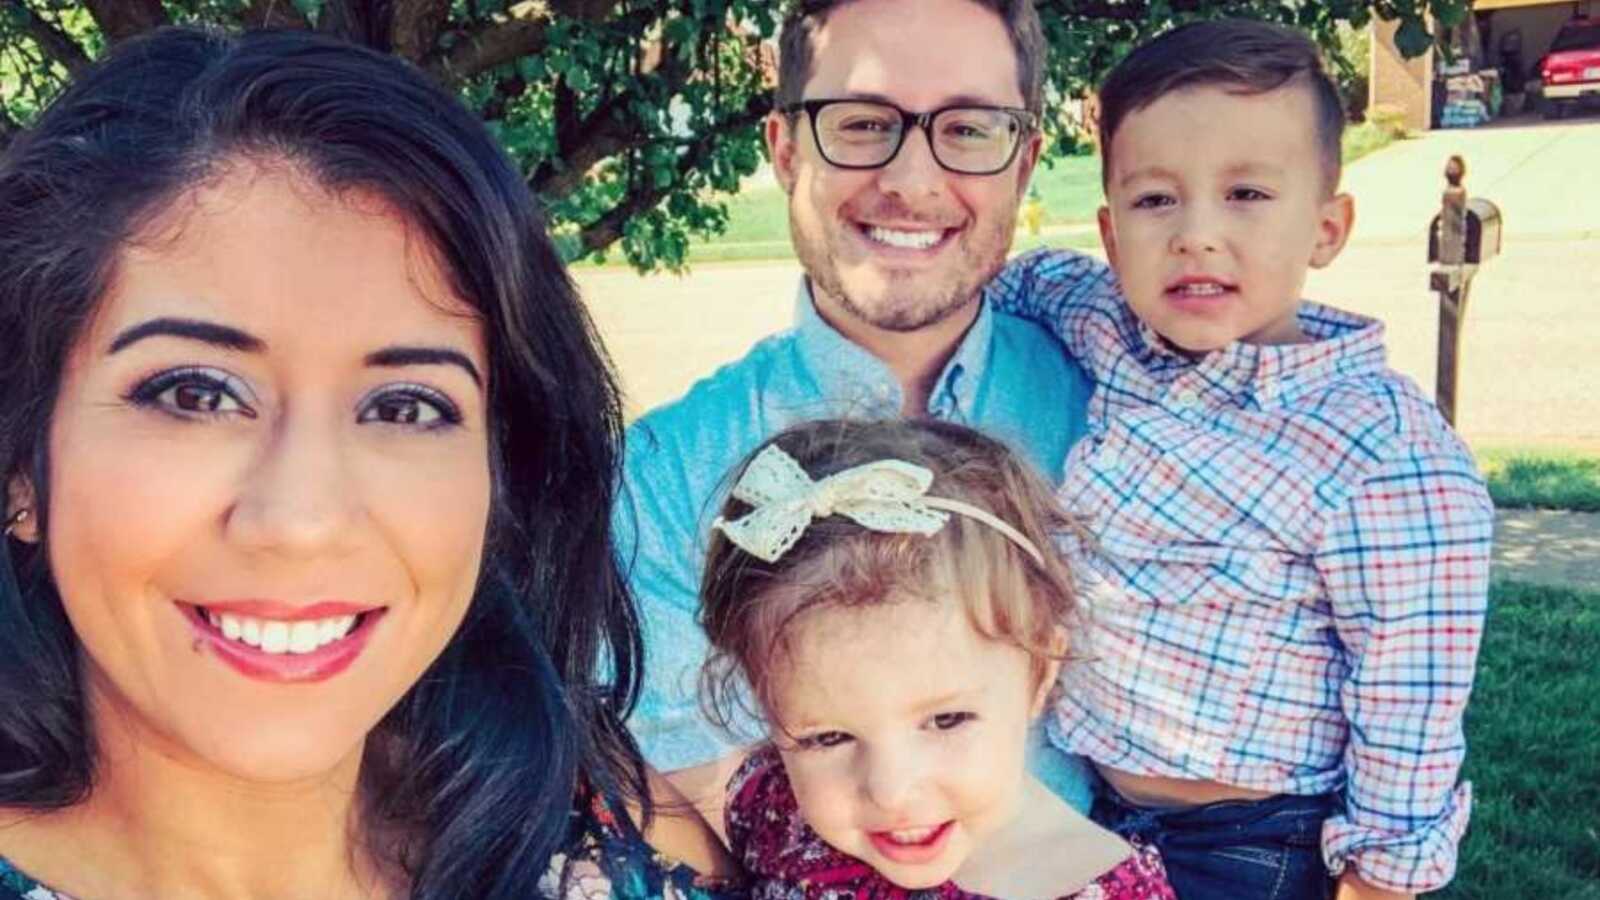 Family of four take a selfie together before Sunday church